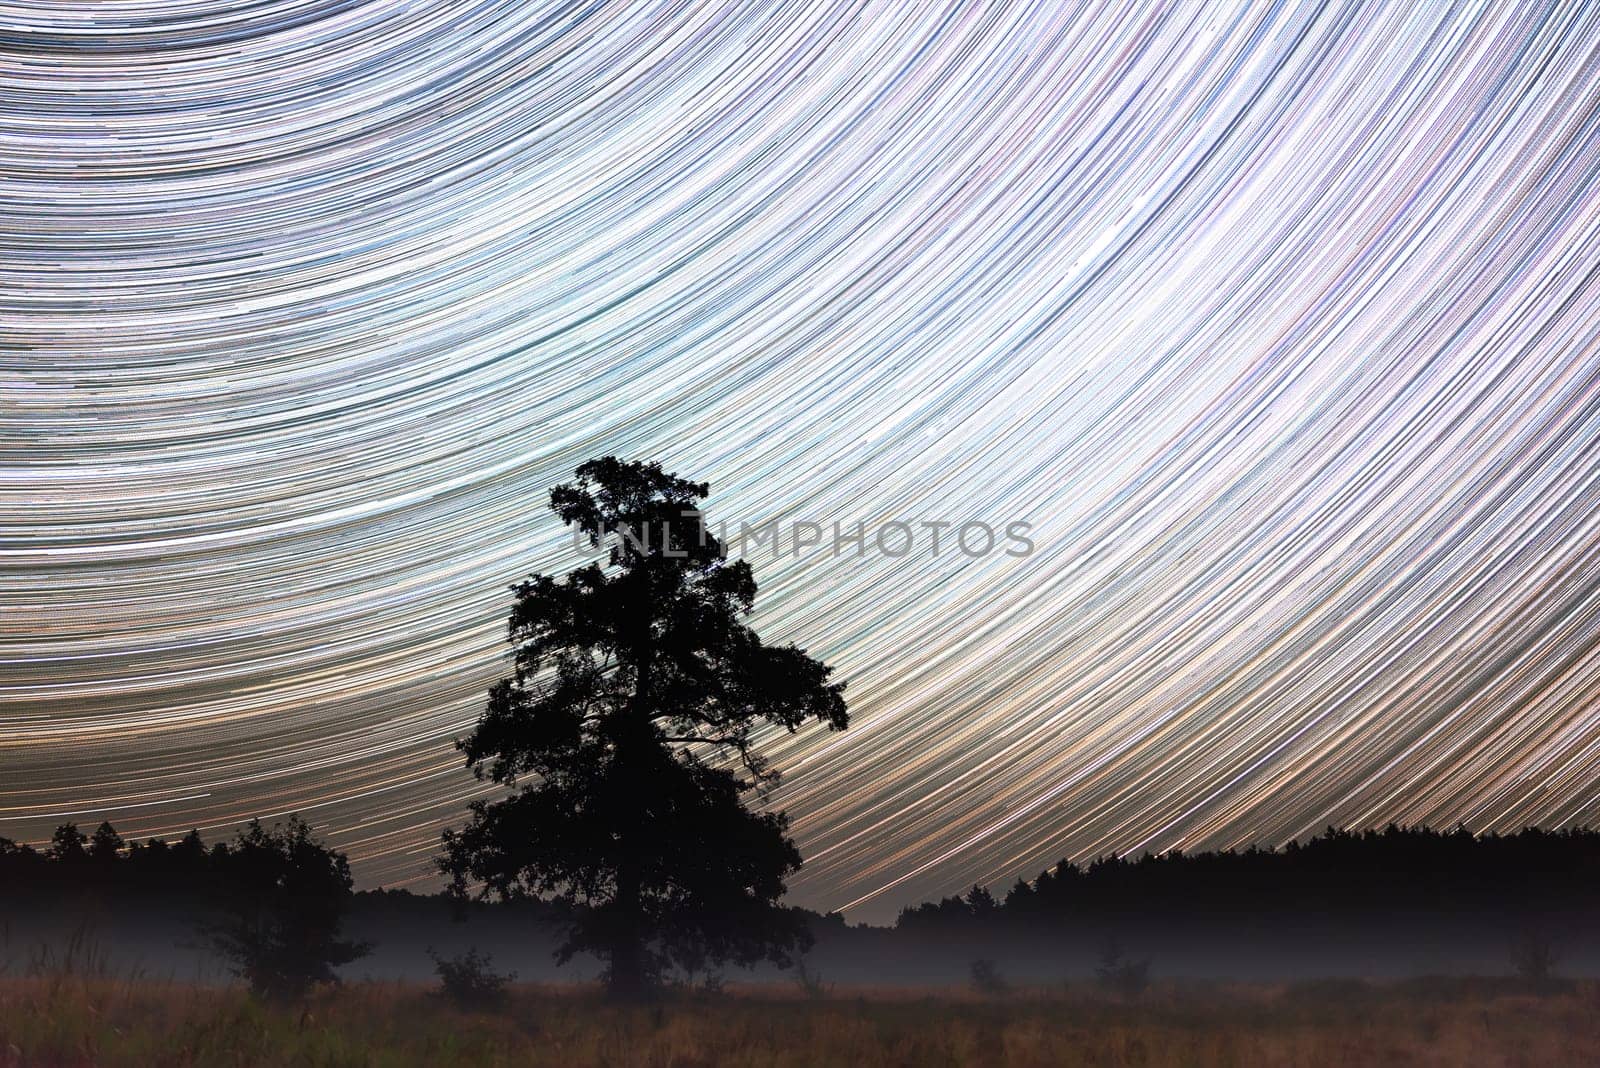 Bright night image of long startrails above misty valley and a tree